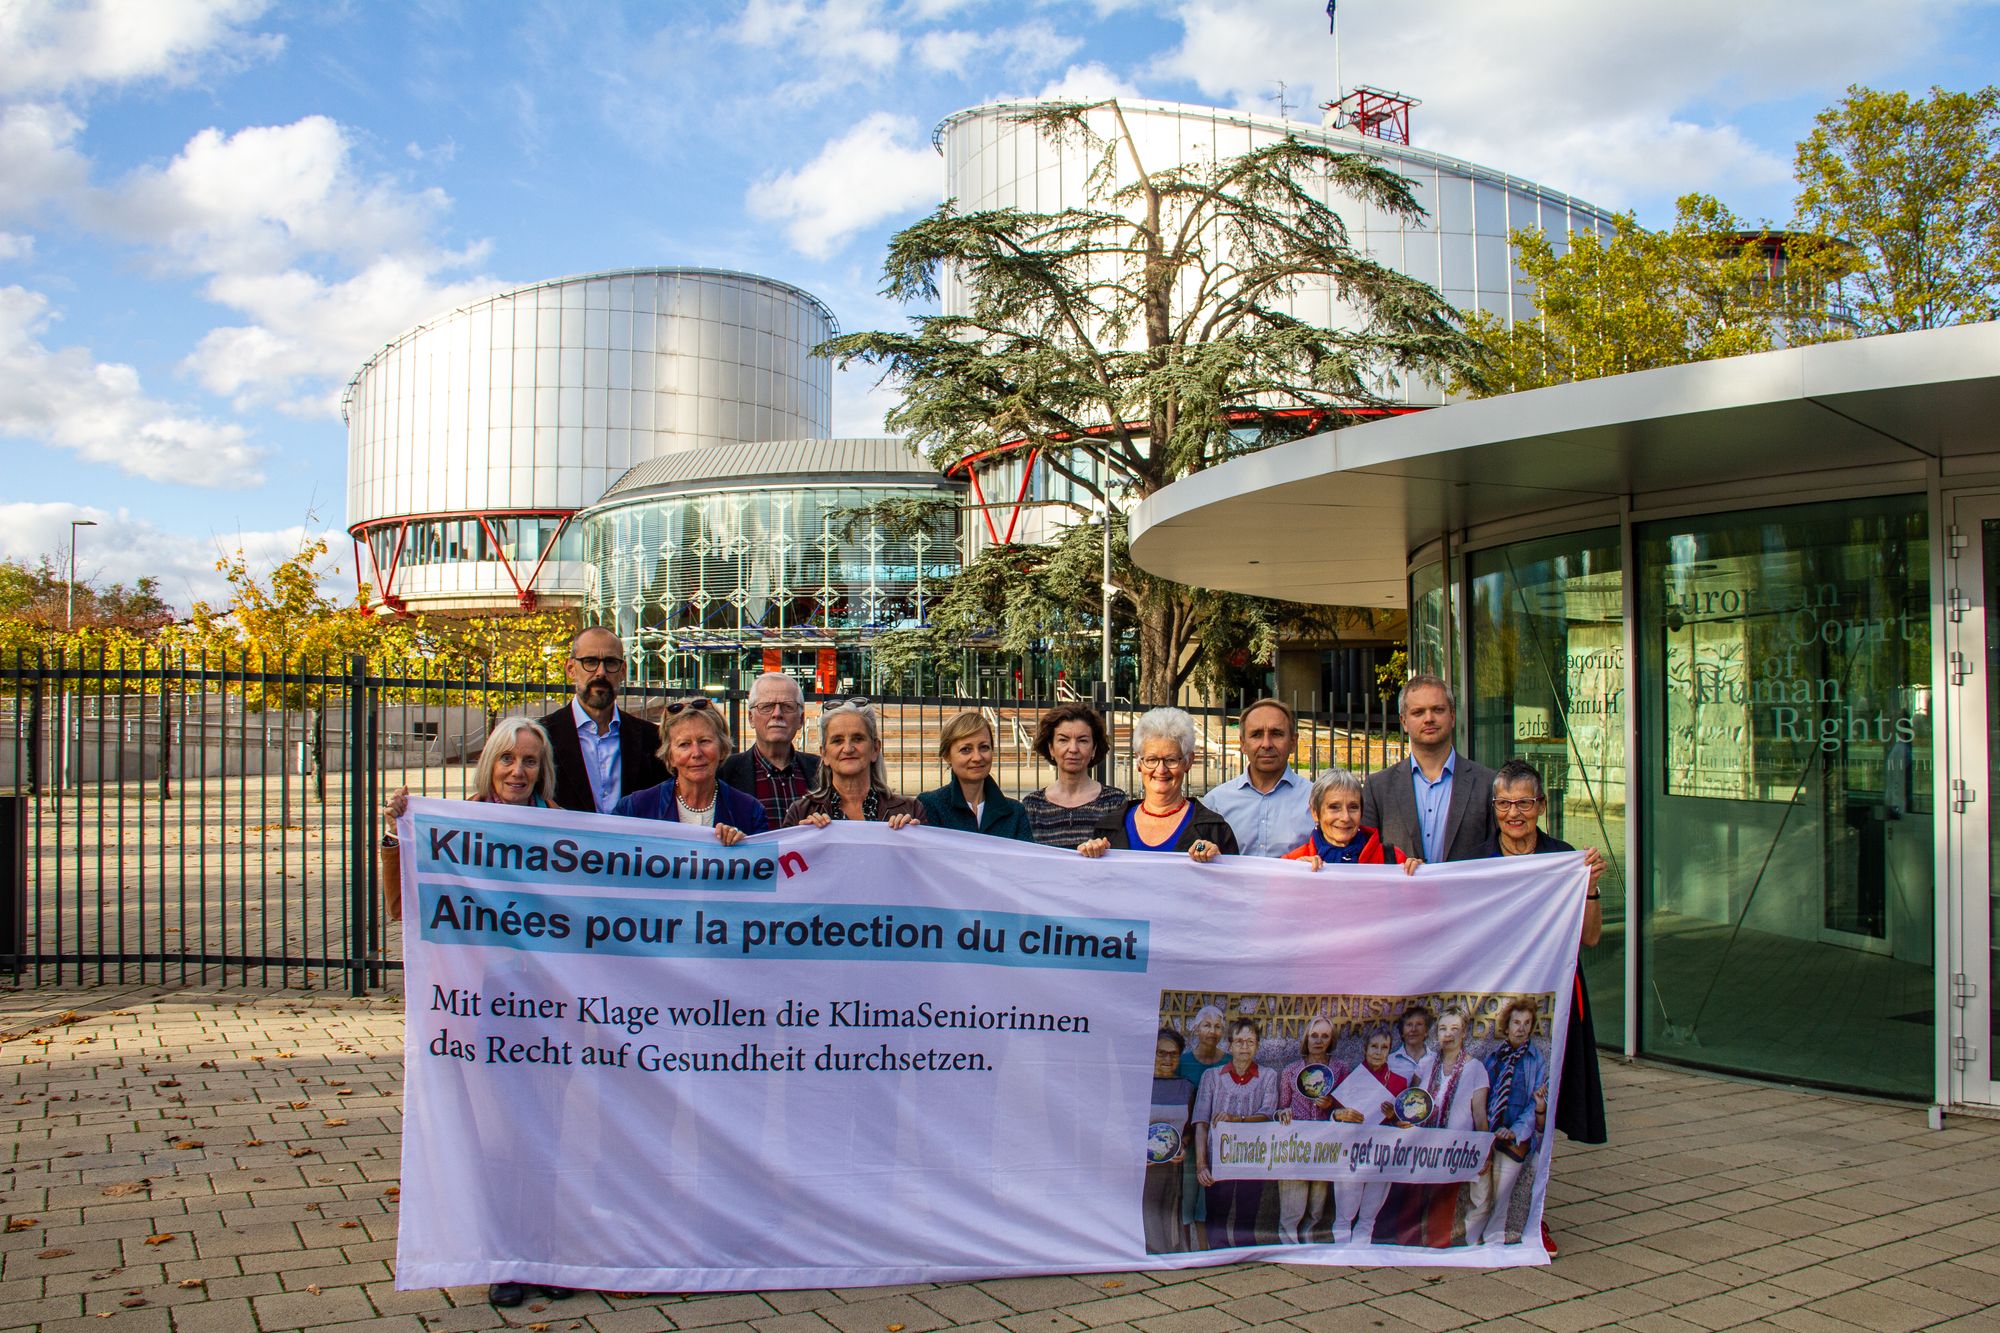 KlimaSeniorinnen, a group of older Swiss women, hold a banner about climate change in front of the European Court of Human Rights